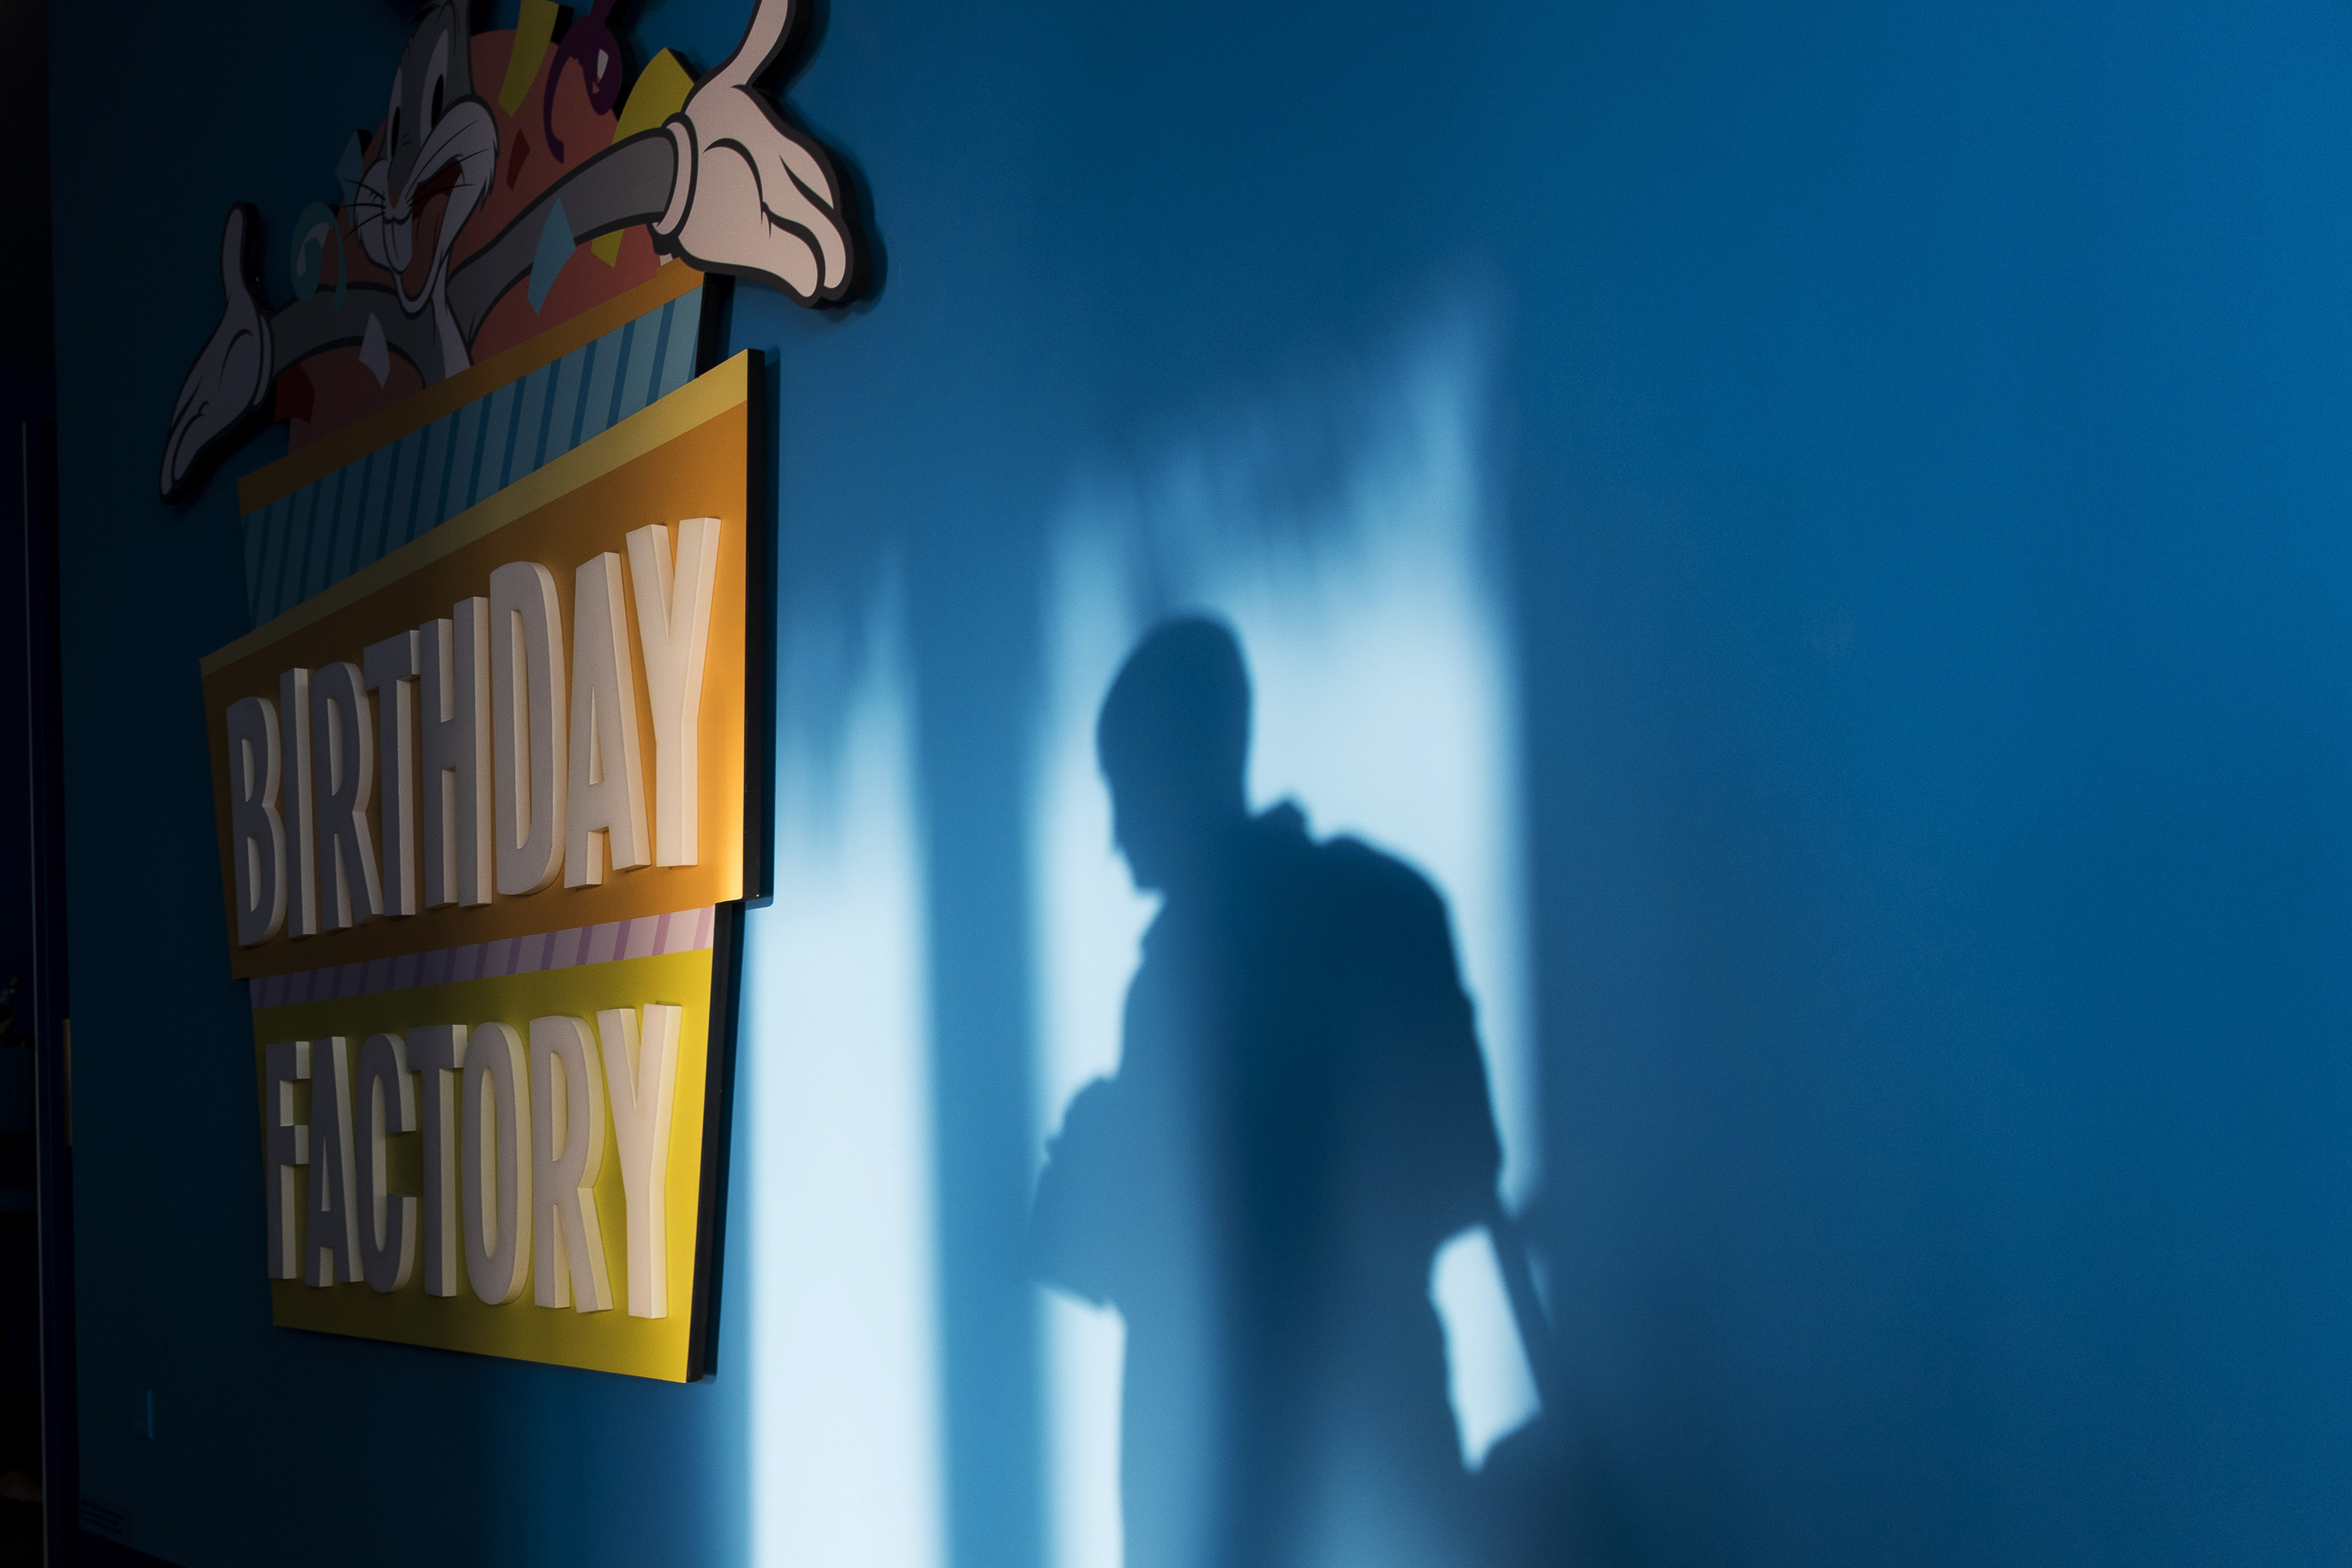 An attendee casts a shadow on a wall next to signage for the birthday Factory in the Warner Bros Fun Zone at the Studio City casino resort, developed by Melco Crown Entertainment Ltd., ahead of the grand opening during a media tour in Macau, China, on Monday, Oct. 26, 2015. Melco Crown is touting a Batman ride, Asia's highest ferris wheel and other Hollywood-centric features for Studio City which is scheduled to open on Oct. 27. Photographer: Xaume Olleros/Bloomberg